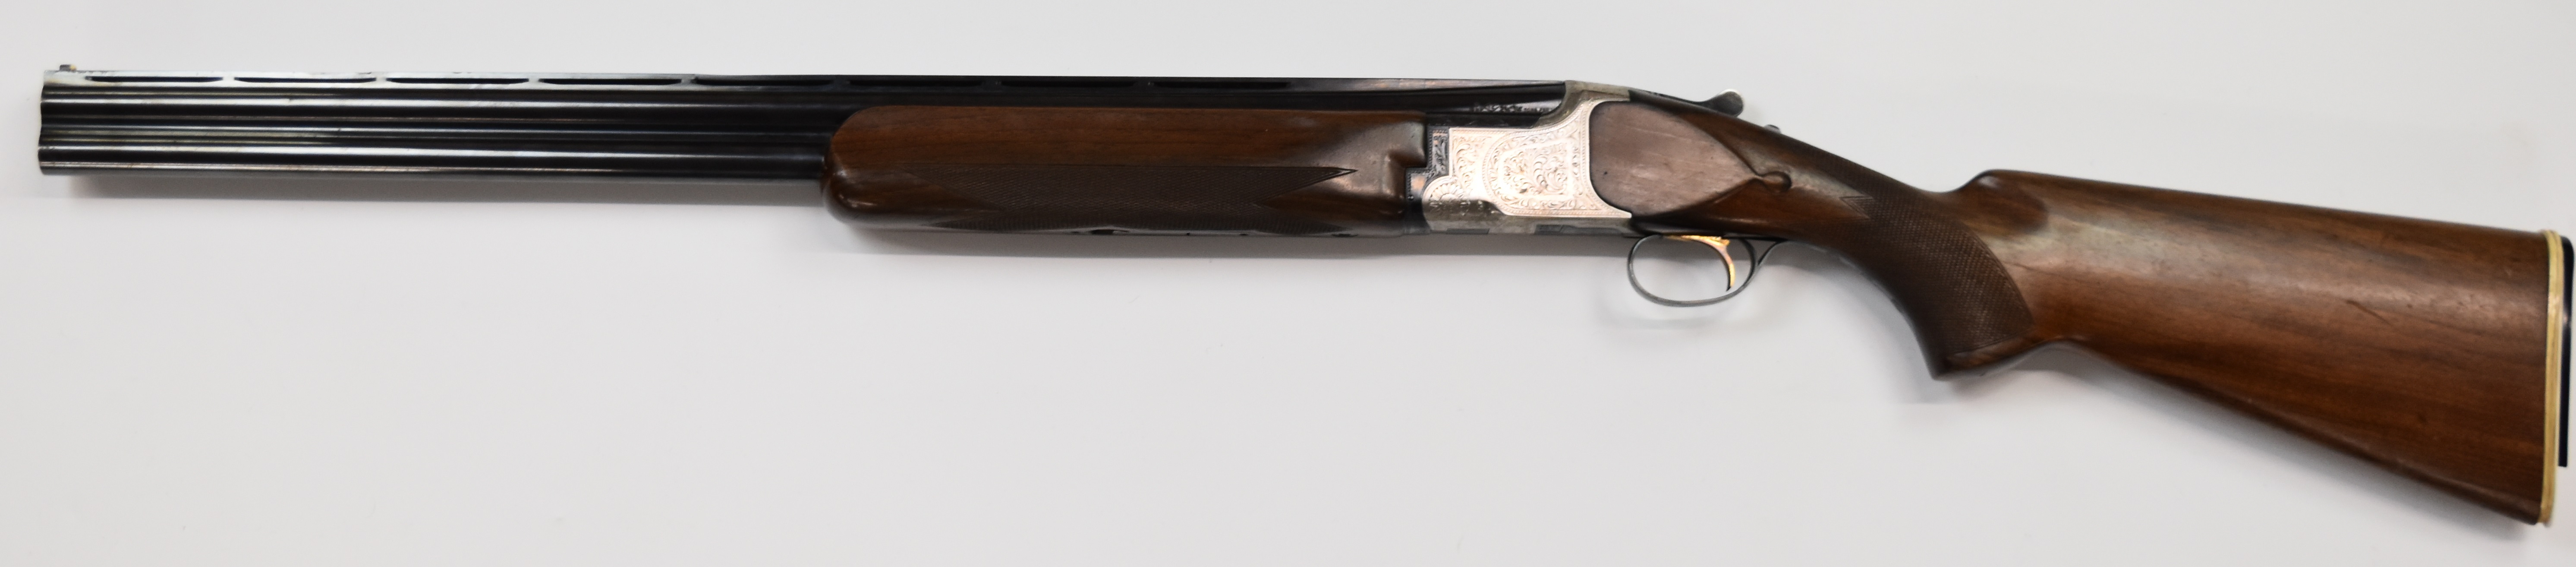 Miroku 12 bore over and under ejector shotgun with engraved locks, underside, trigger guard, top - Image 7 of 11